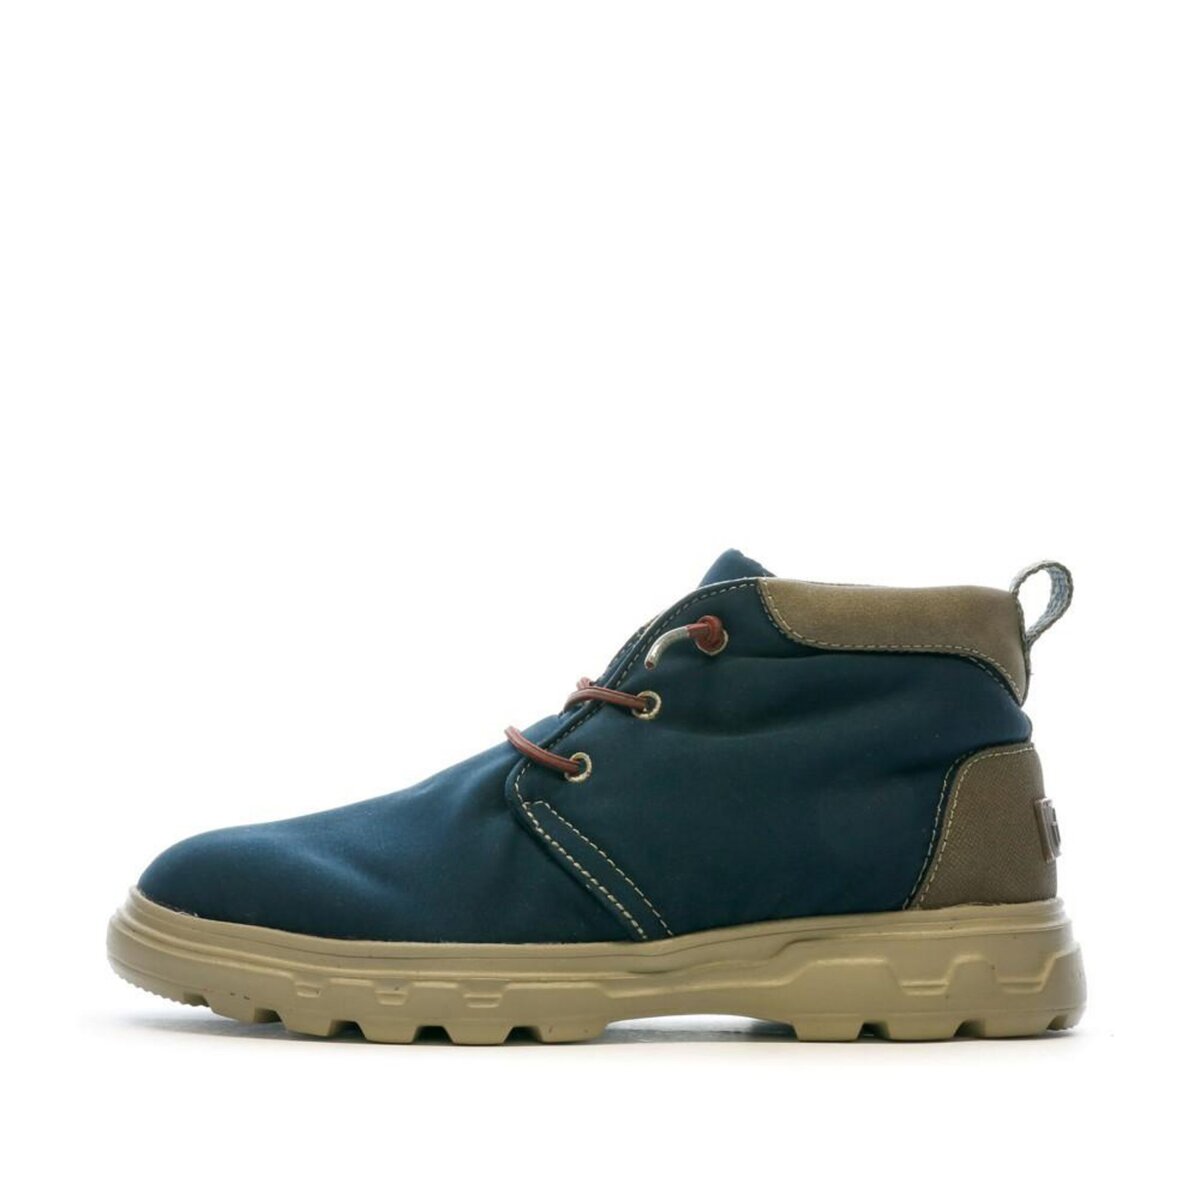 Boots Marine Homme Hey Dude Spencer pas cher - Auchan.fr